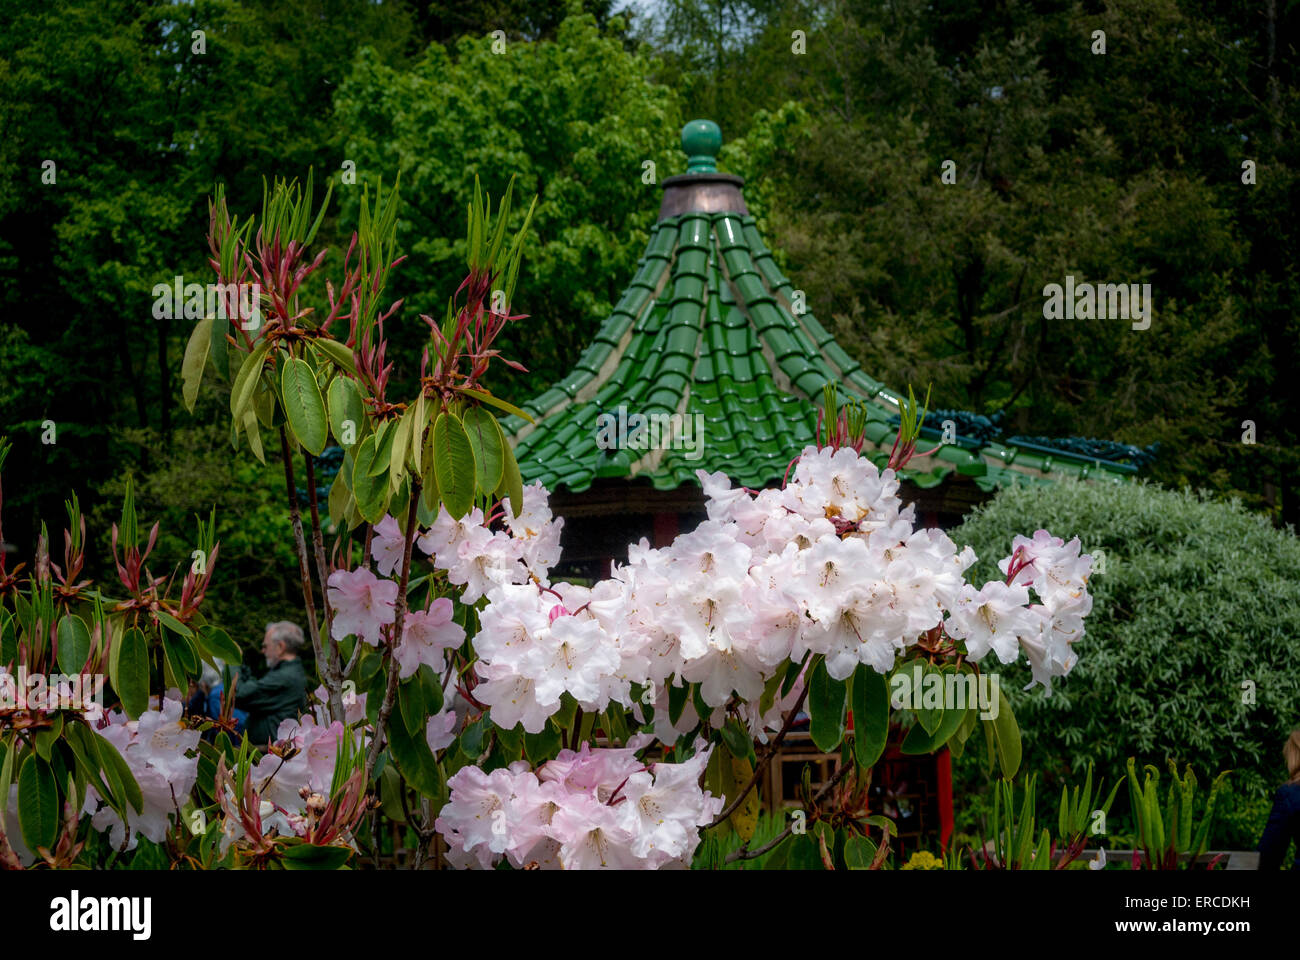 Pagoda roof emerging from behind a flowering rhododendron bush Stock Photo